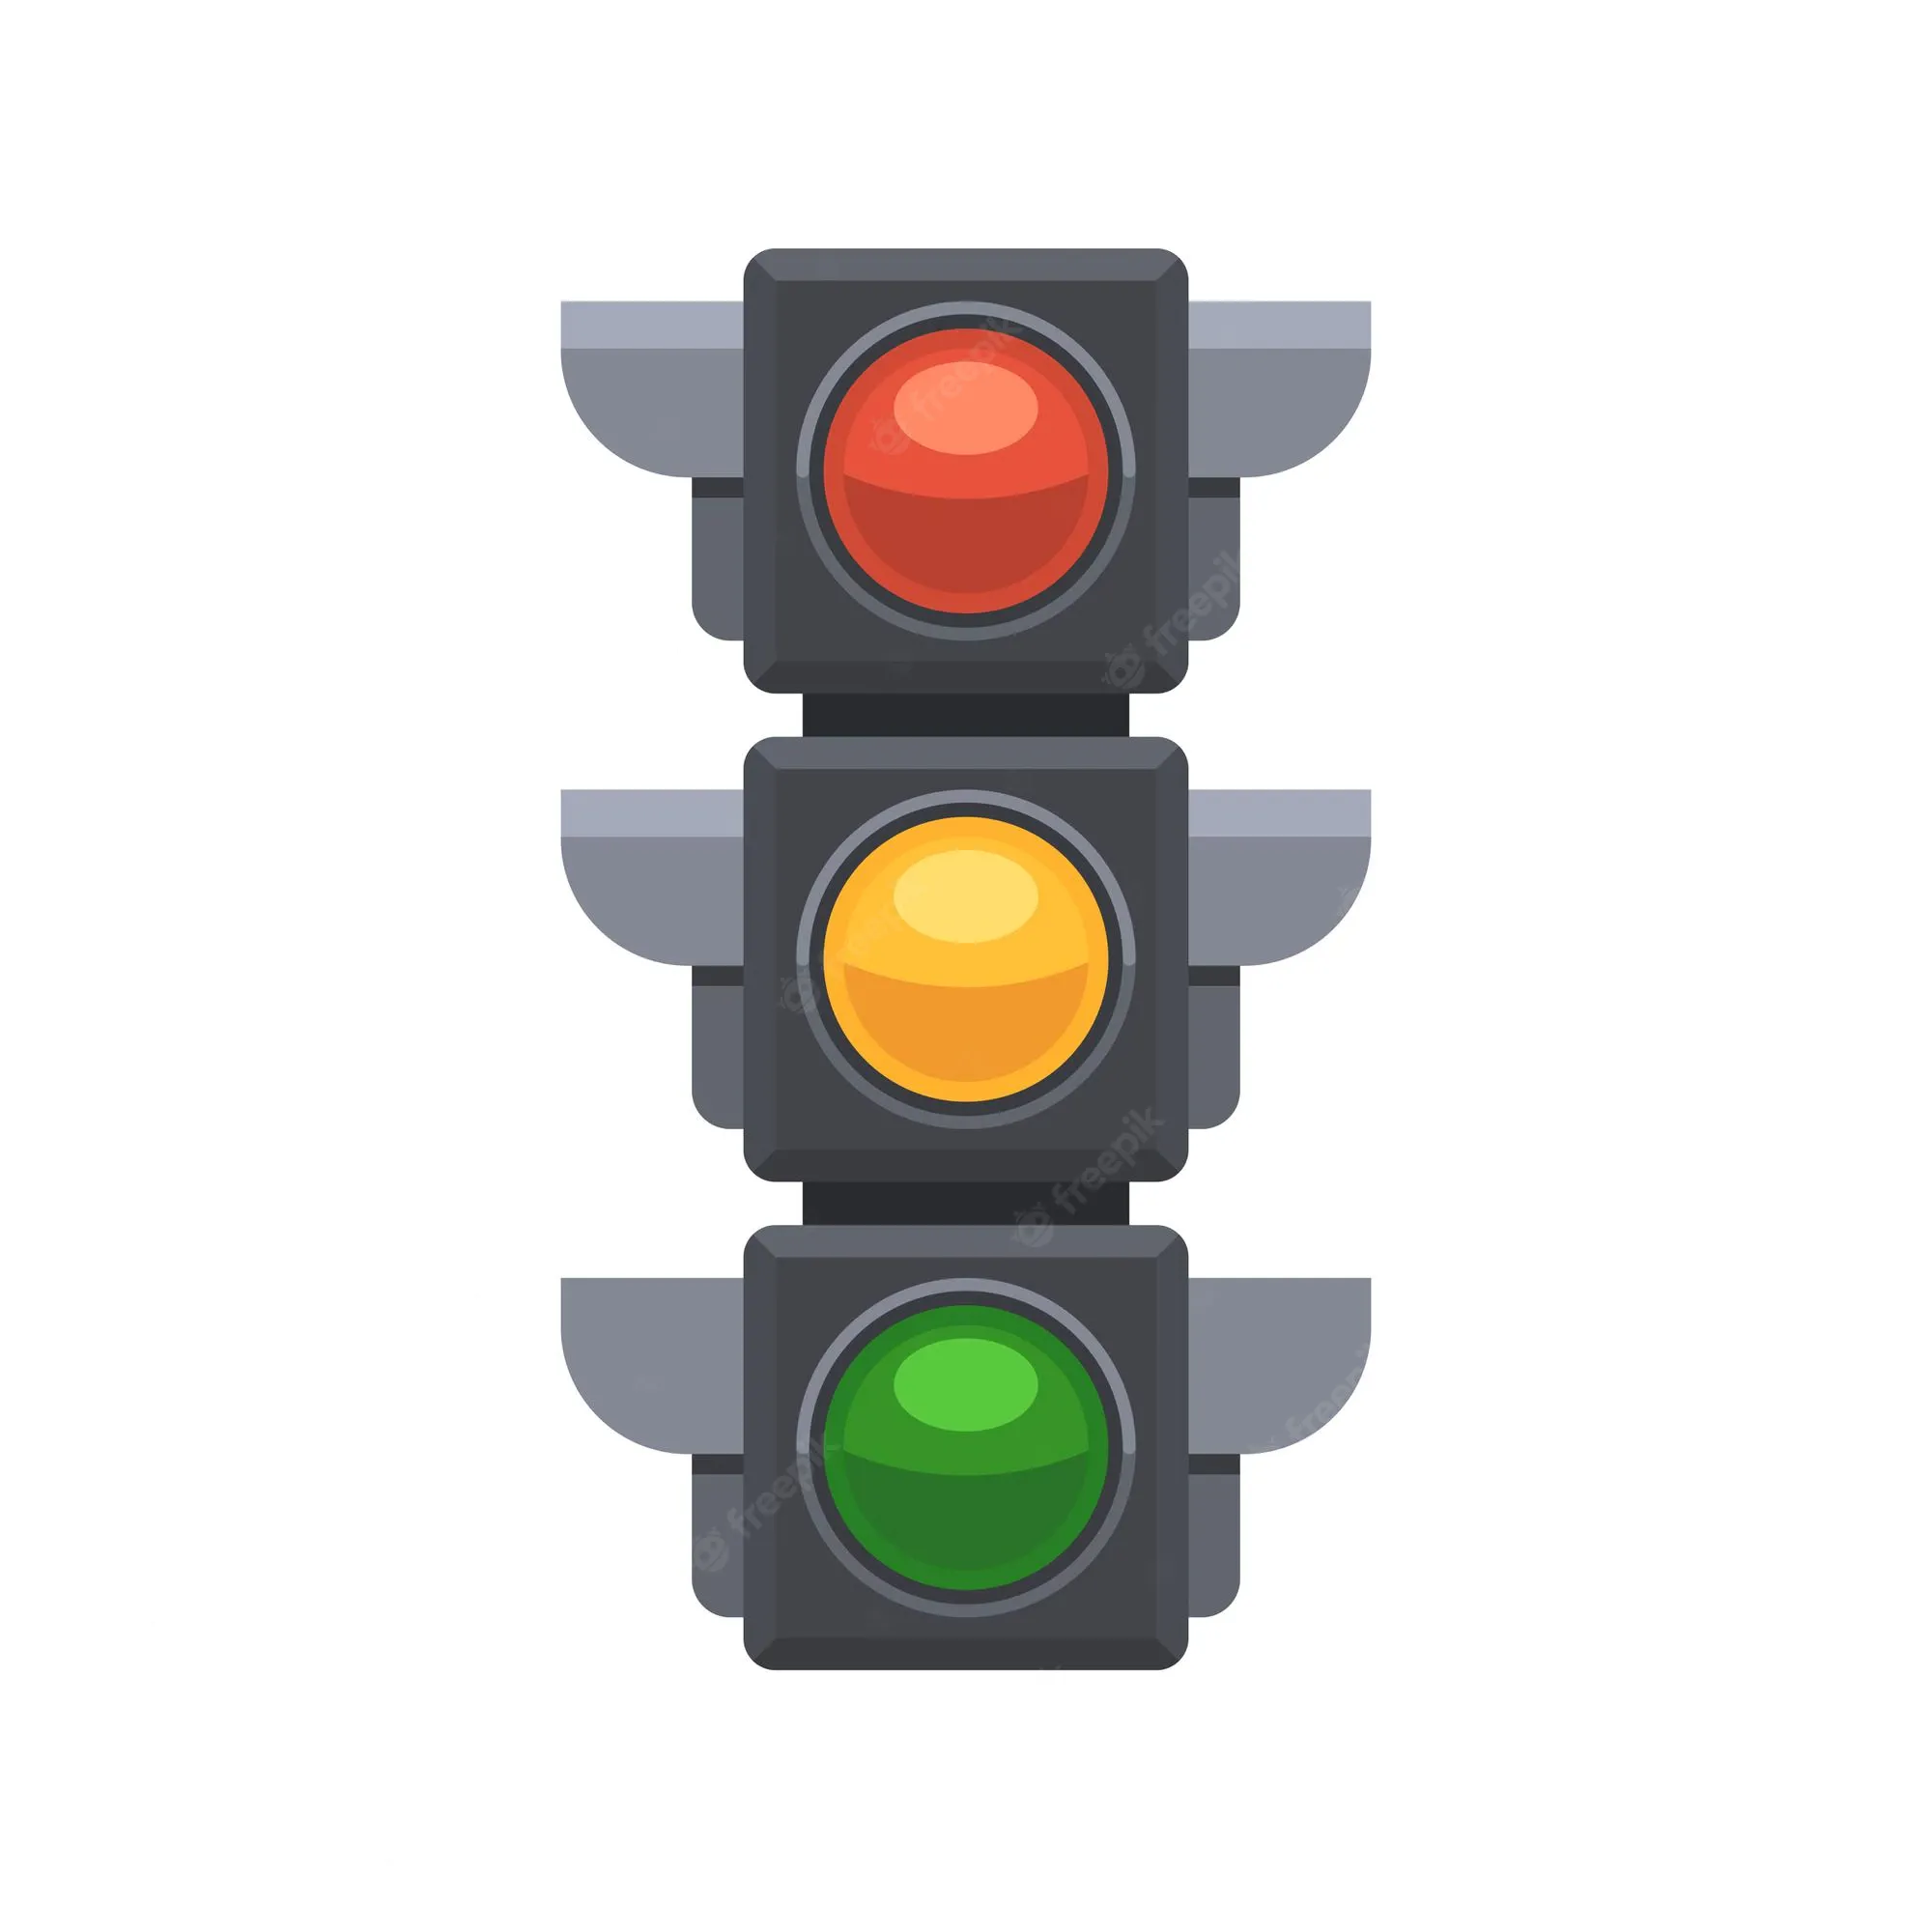 Why traffic lights are red, green and yellow?